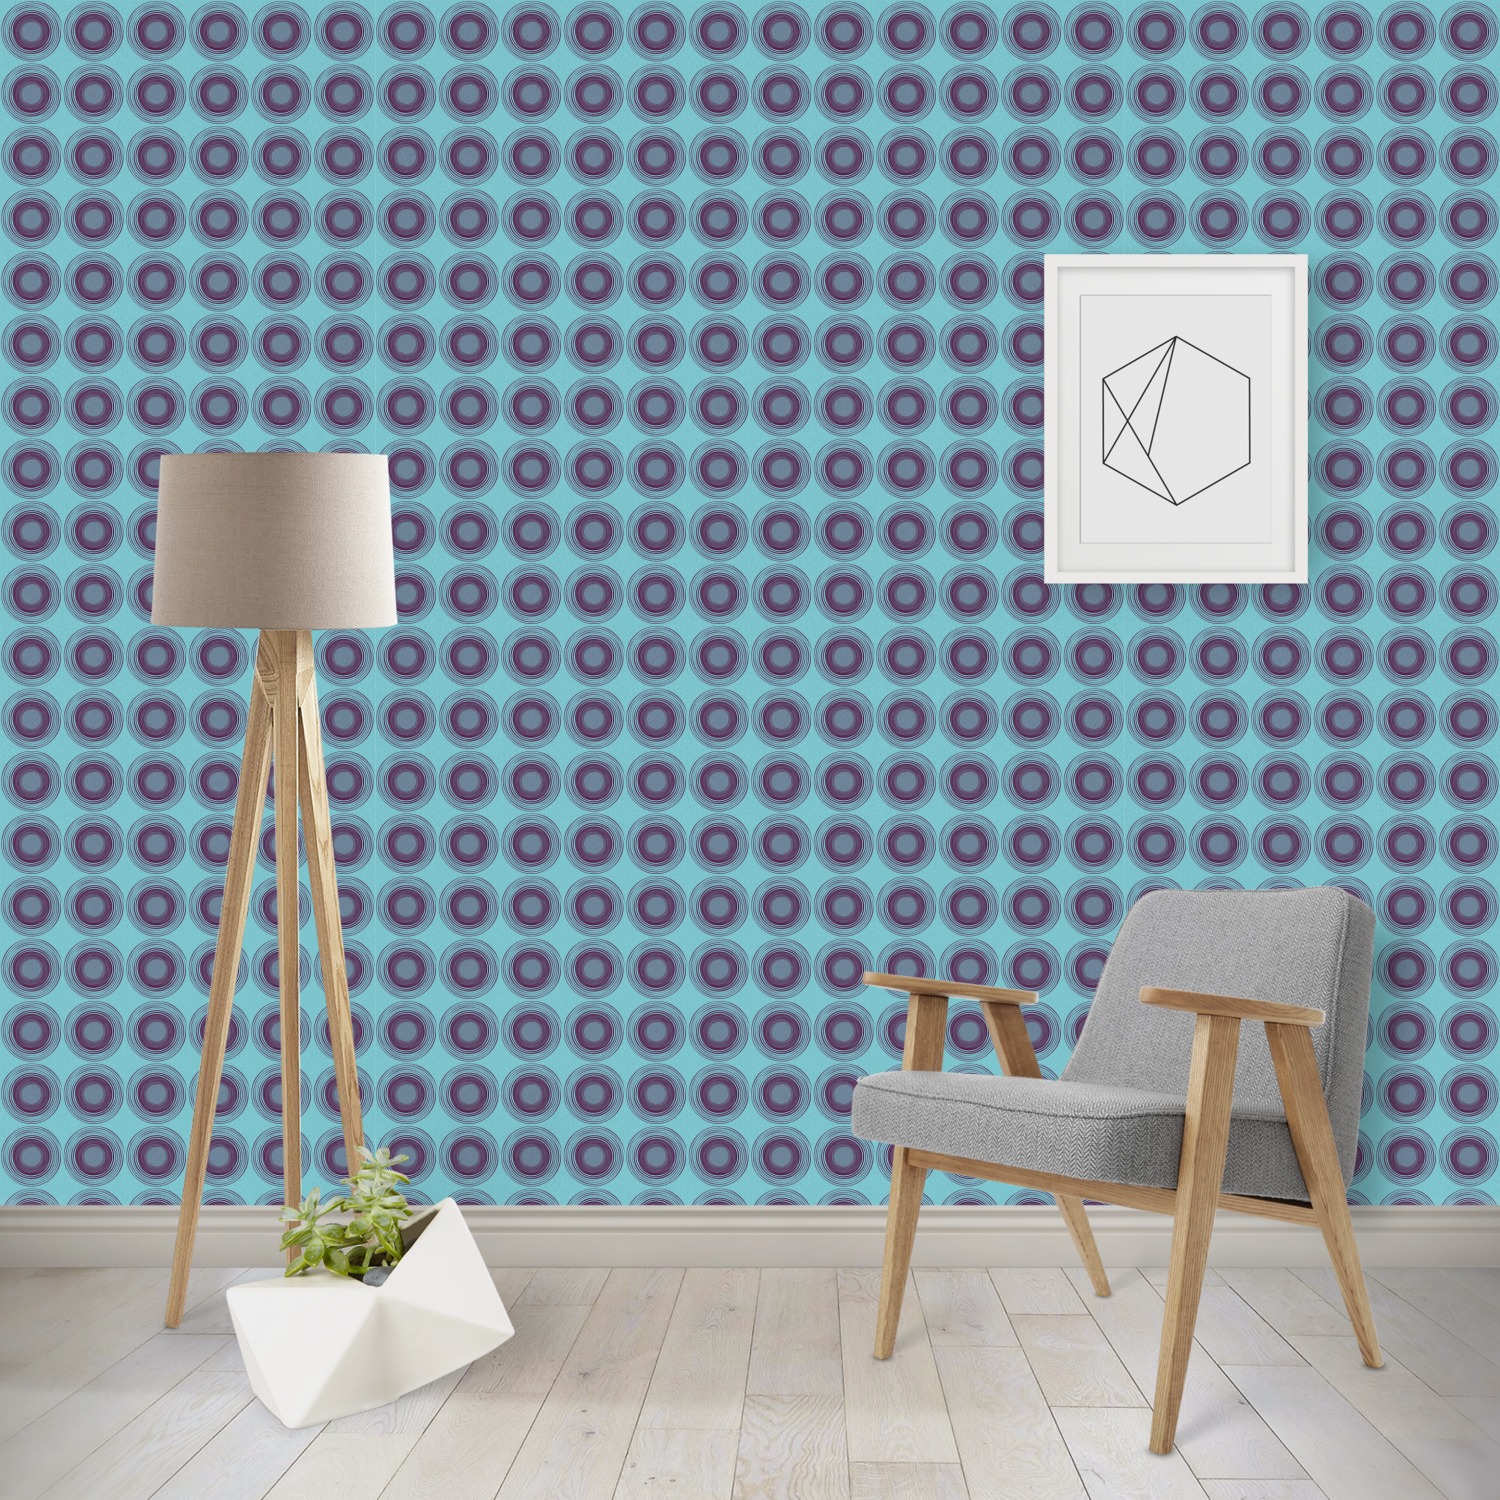 Custom Concentric Circles Wallpaper & Surface Covering | YouCustomizeIt